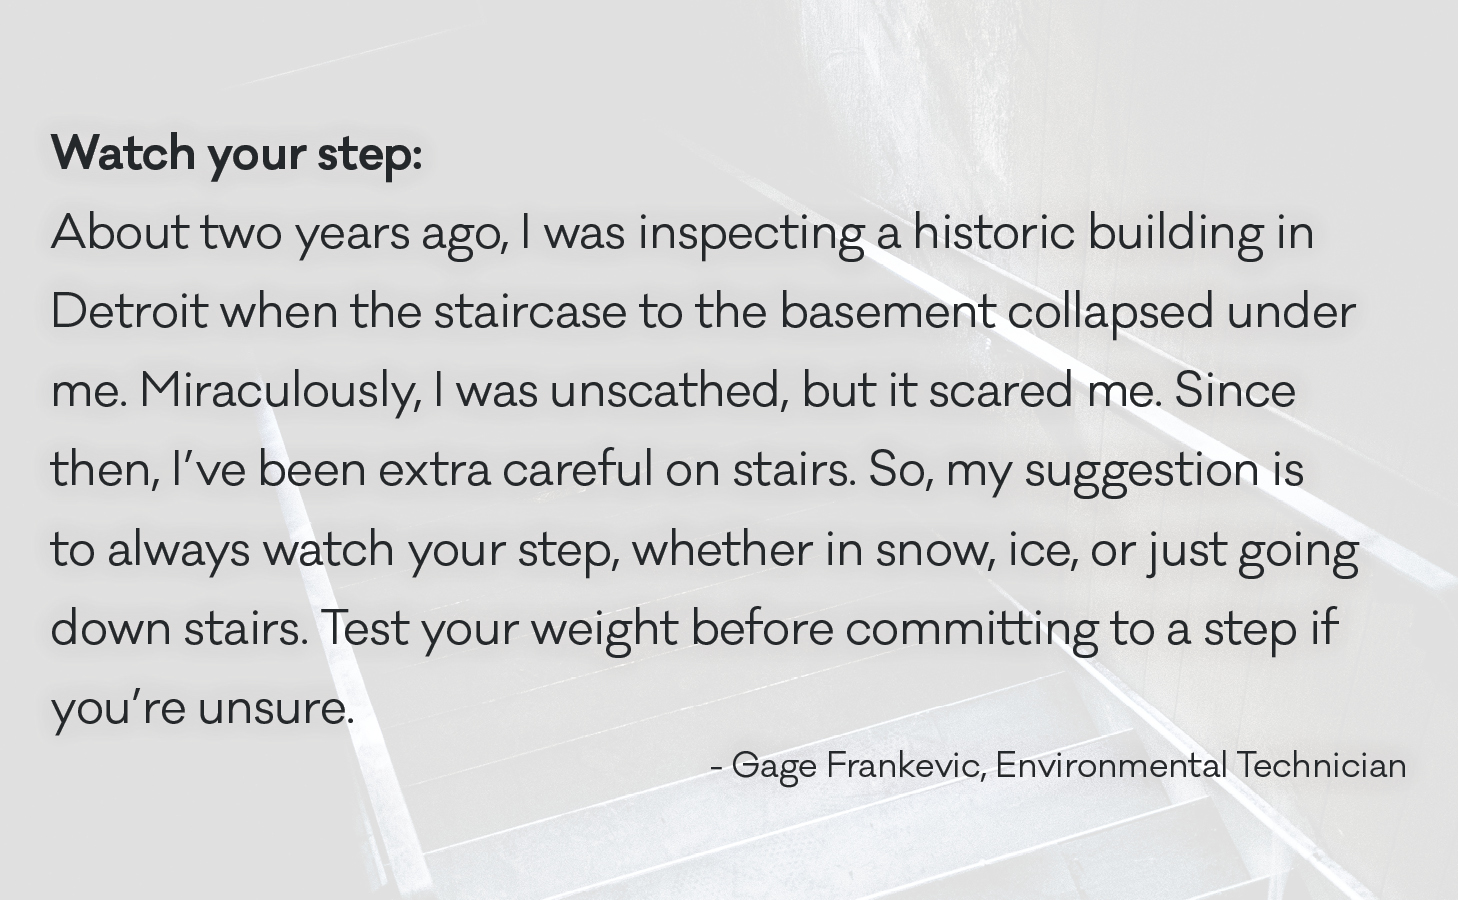 About two years ago, I was inspecting a historic building in Detroit when the staircase to the basement collapsed under me. Miraculously, I was unscathed, but it scared me. Since then, I’ve been extra careful on stairs. So, my suggestion is to always watch your step, whether in snow, ice, or just going down stairs. Test your weight before committing to a step if you’re unsure.